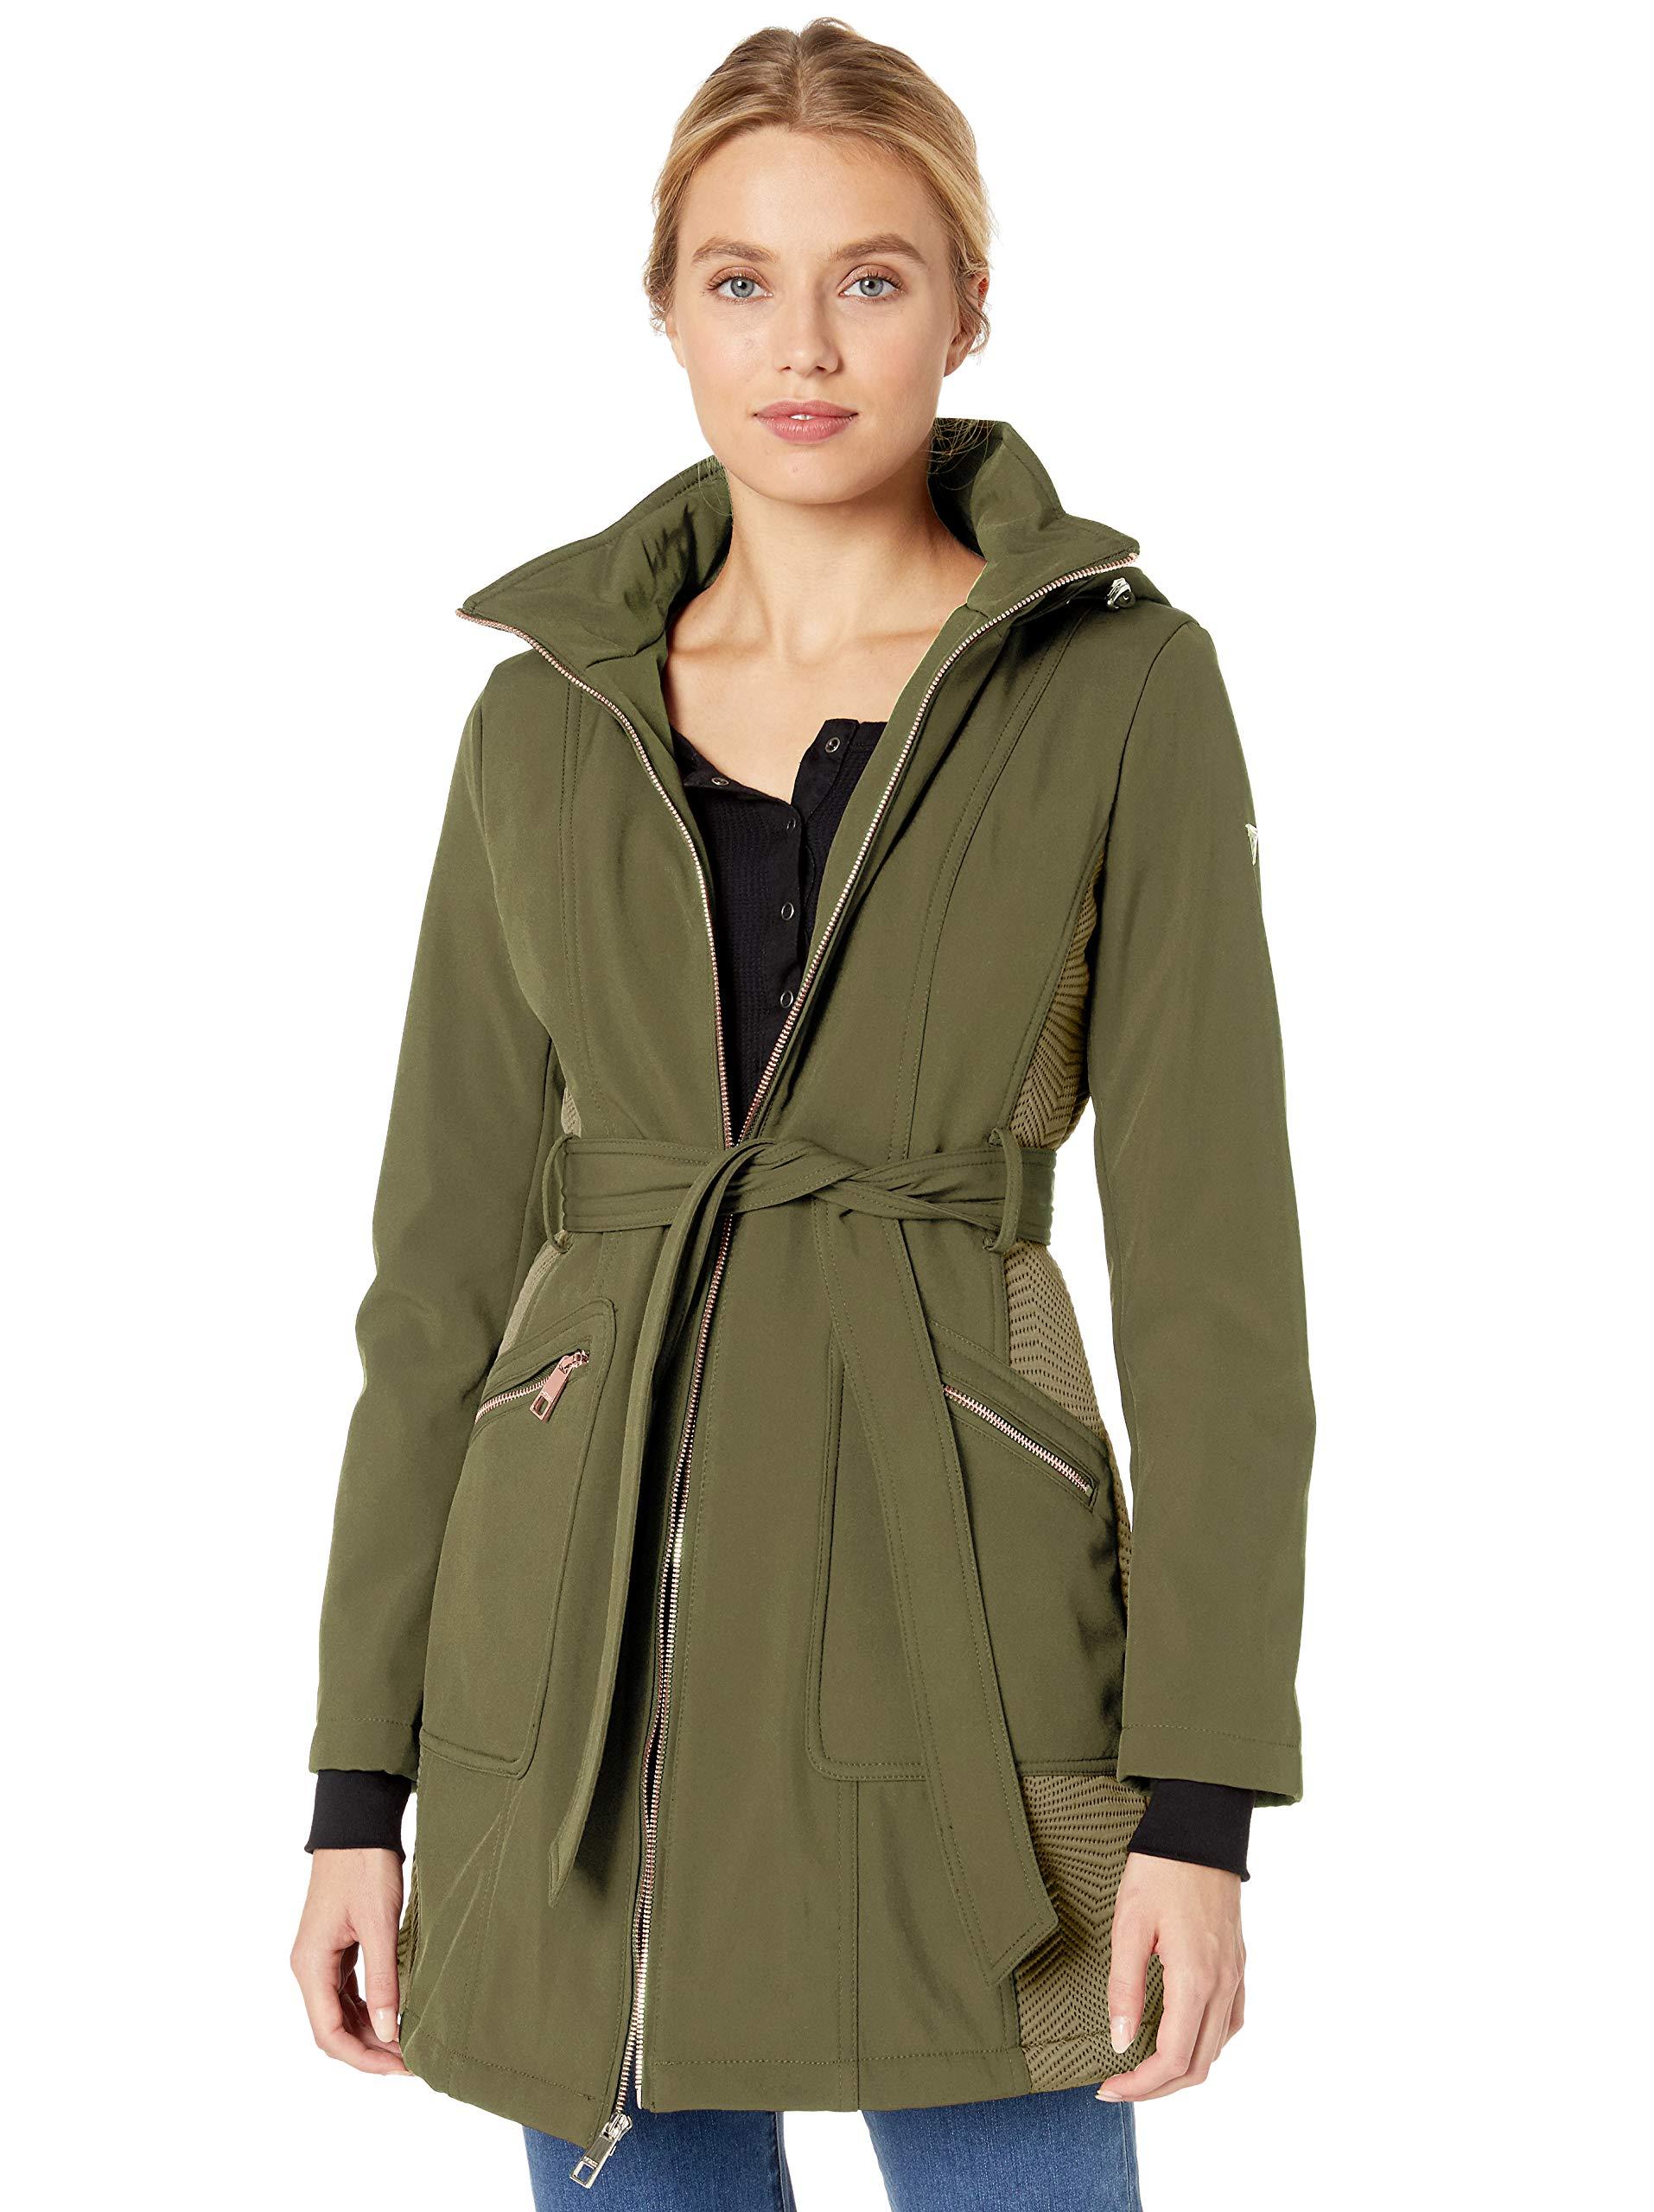 Guess Belted Softshell Jacket With Hood in Cargo Green (Green) - Lyst